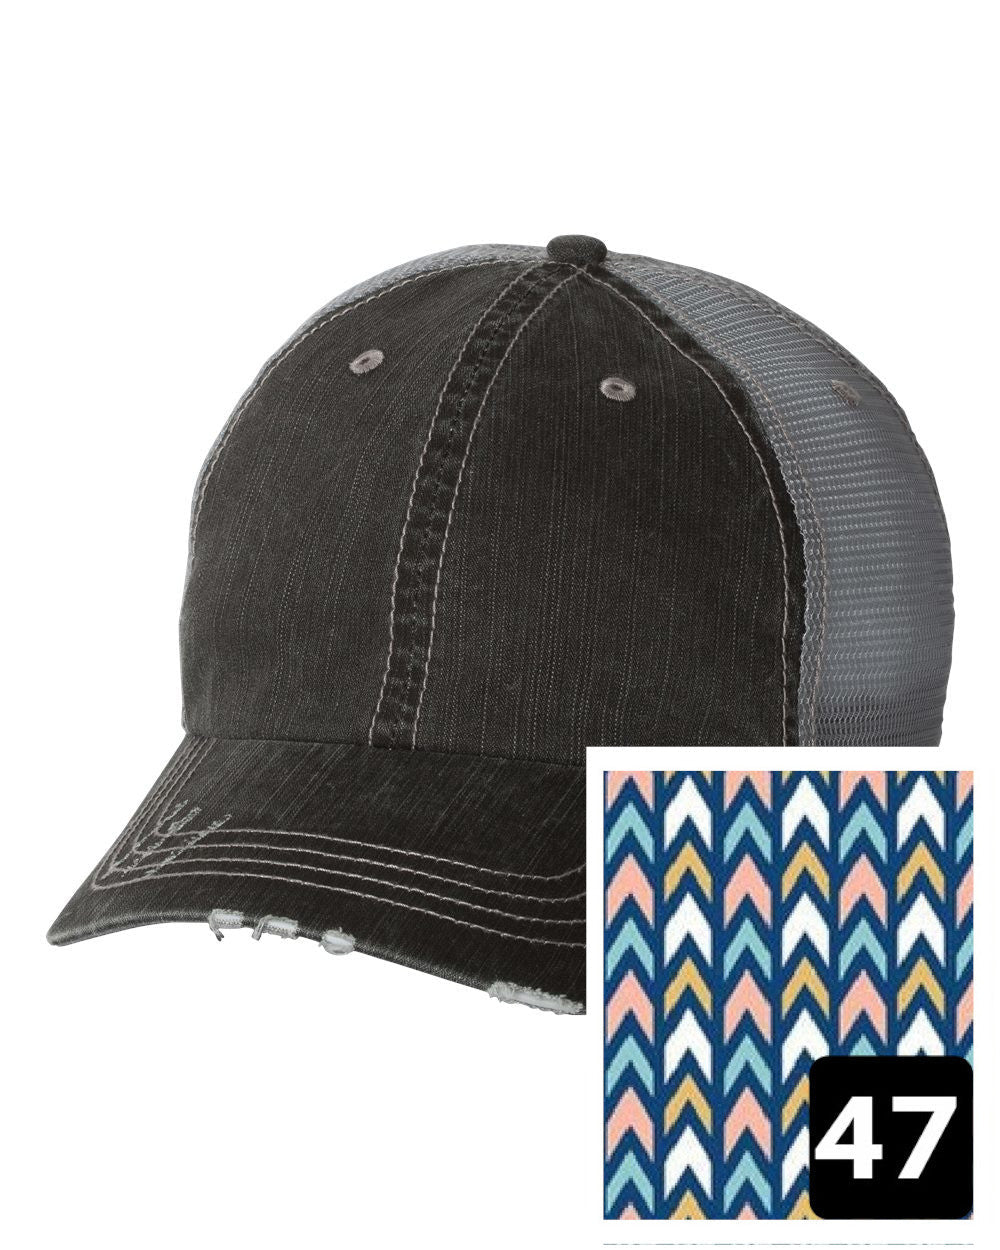 gray distressed trucker hat with pink trellis fabric state of Utah